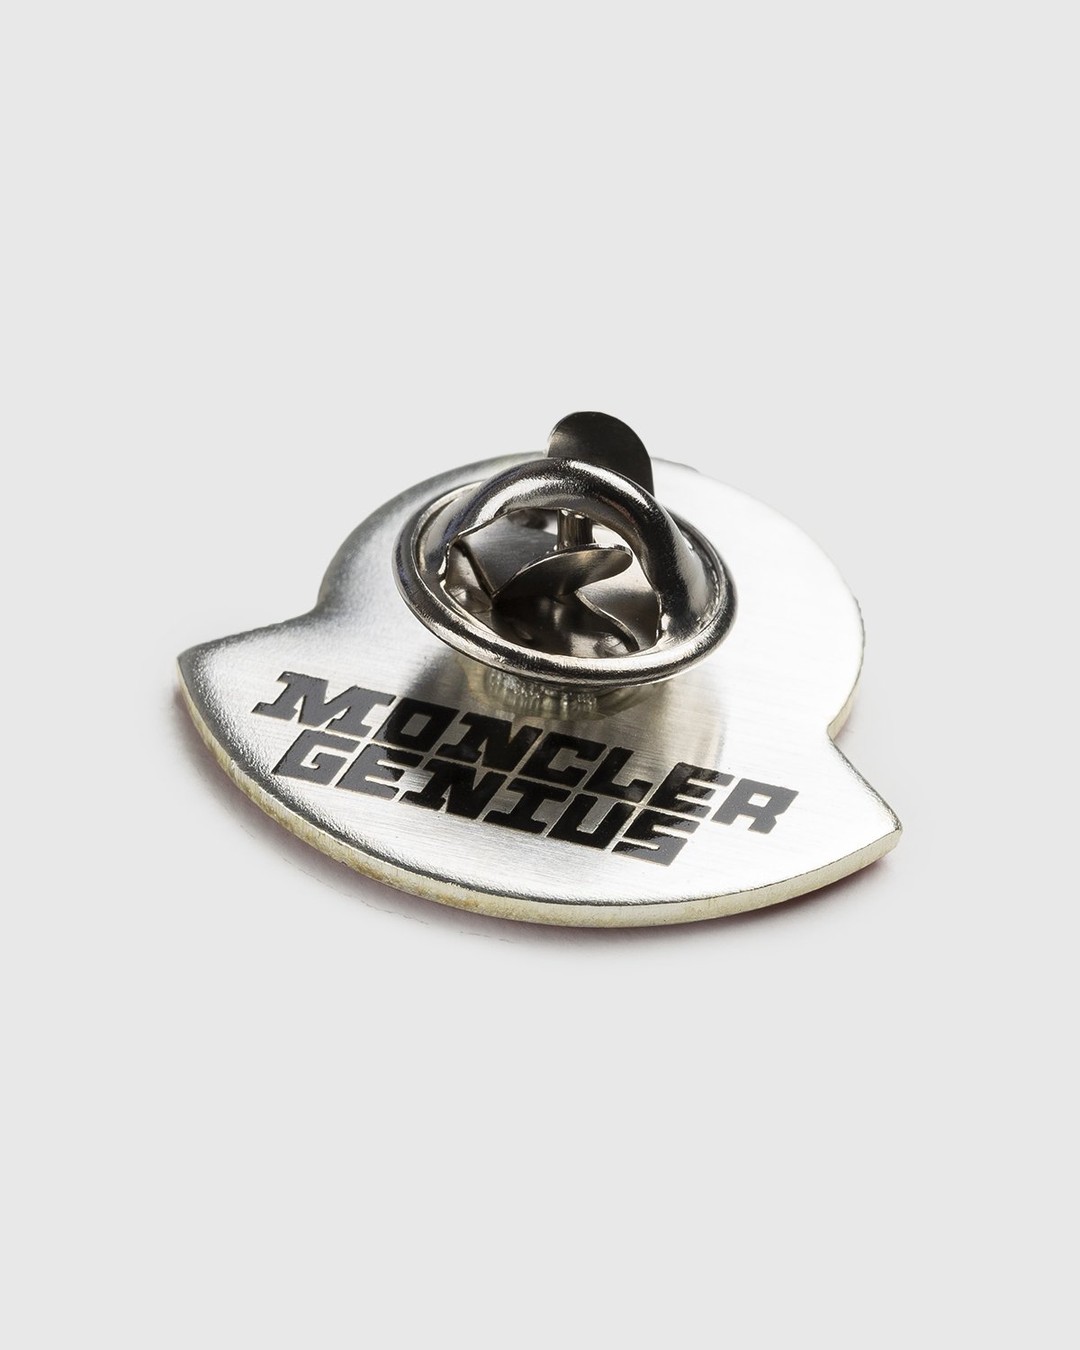 avengers badge - Buy avengers badge at Best Price in Malaysia